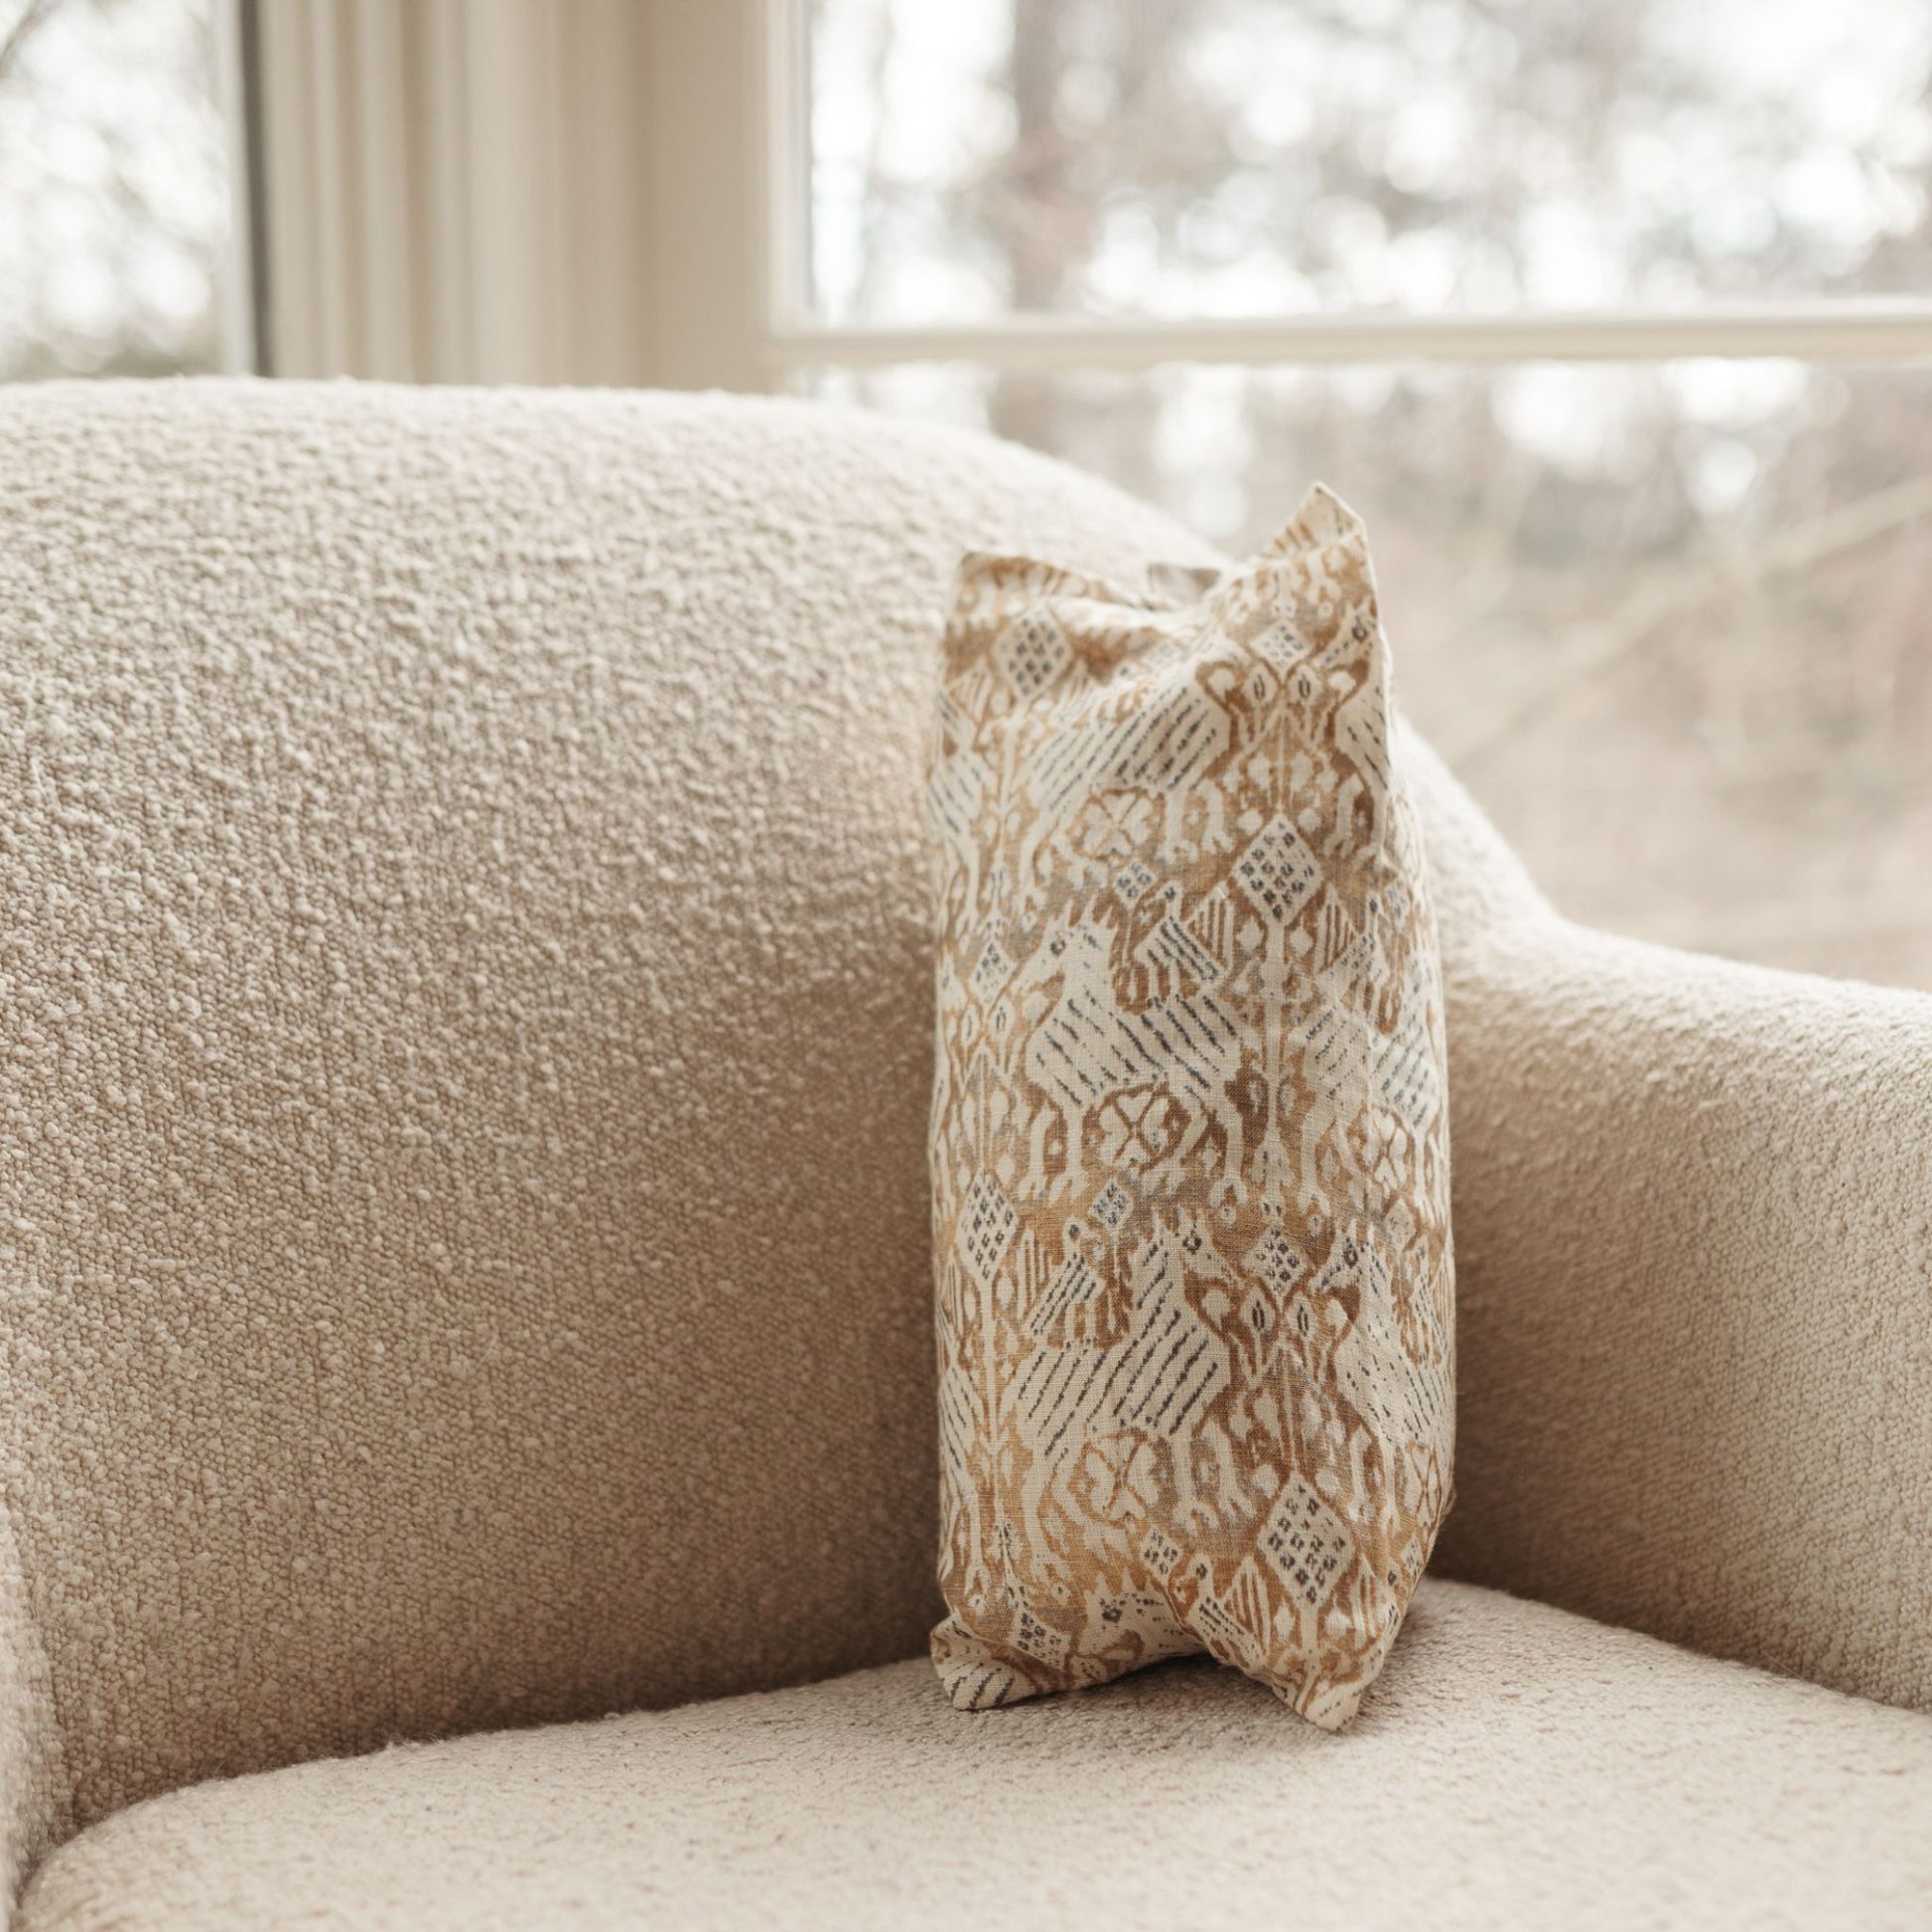 Buckwheat Pillow with abstract golden pattern resting on a sofa. The cover is 100% linen.